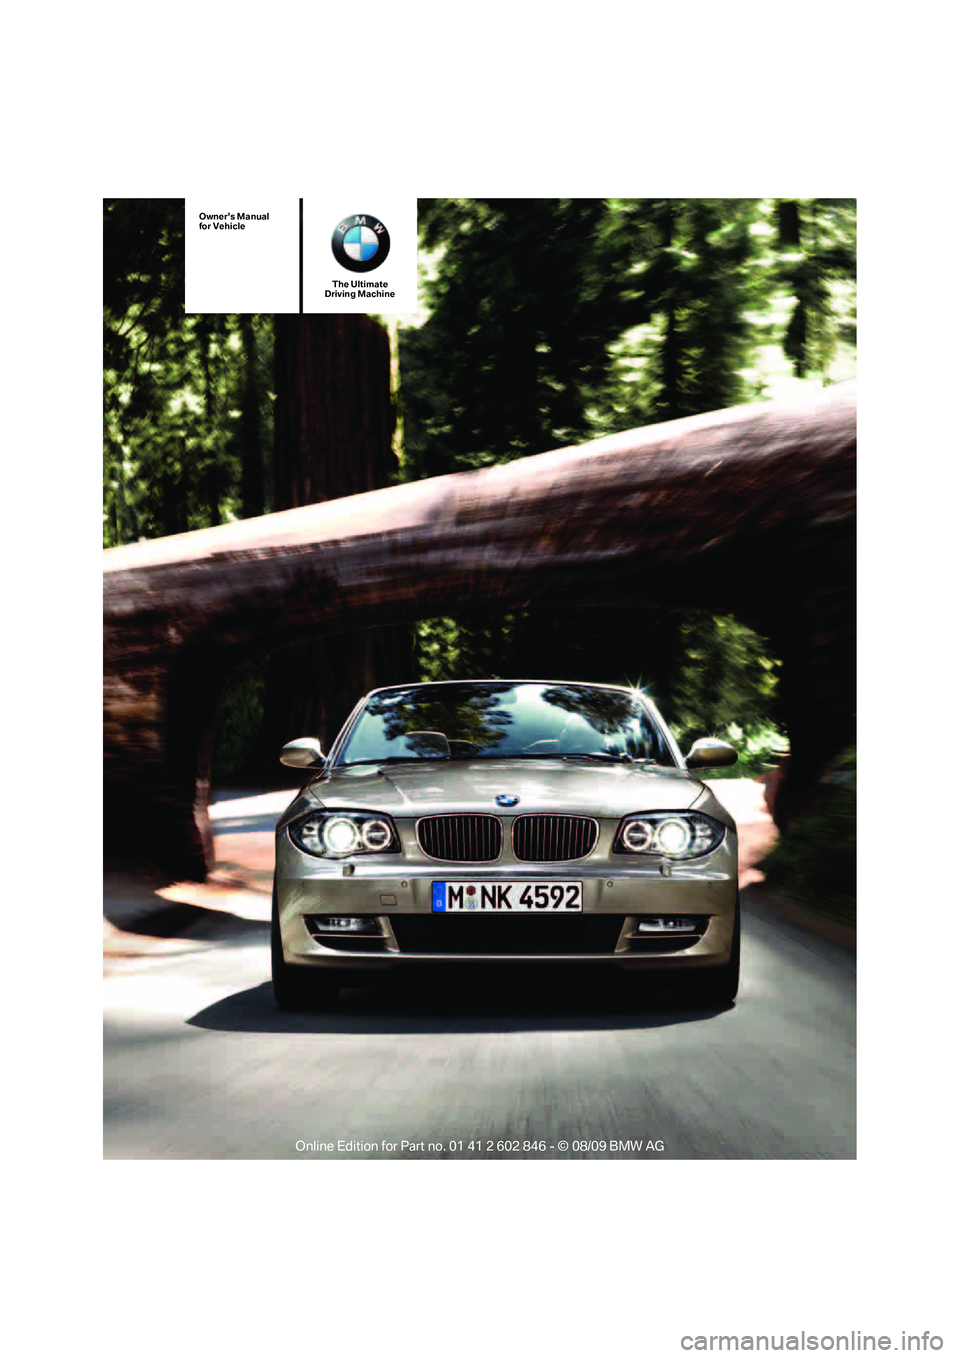 BMW 135I CONVERTIBLE 2010  Owners Manual The Ultimate
Driving Machine
Owners Manual
for Vehicle 